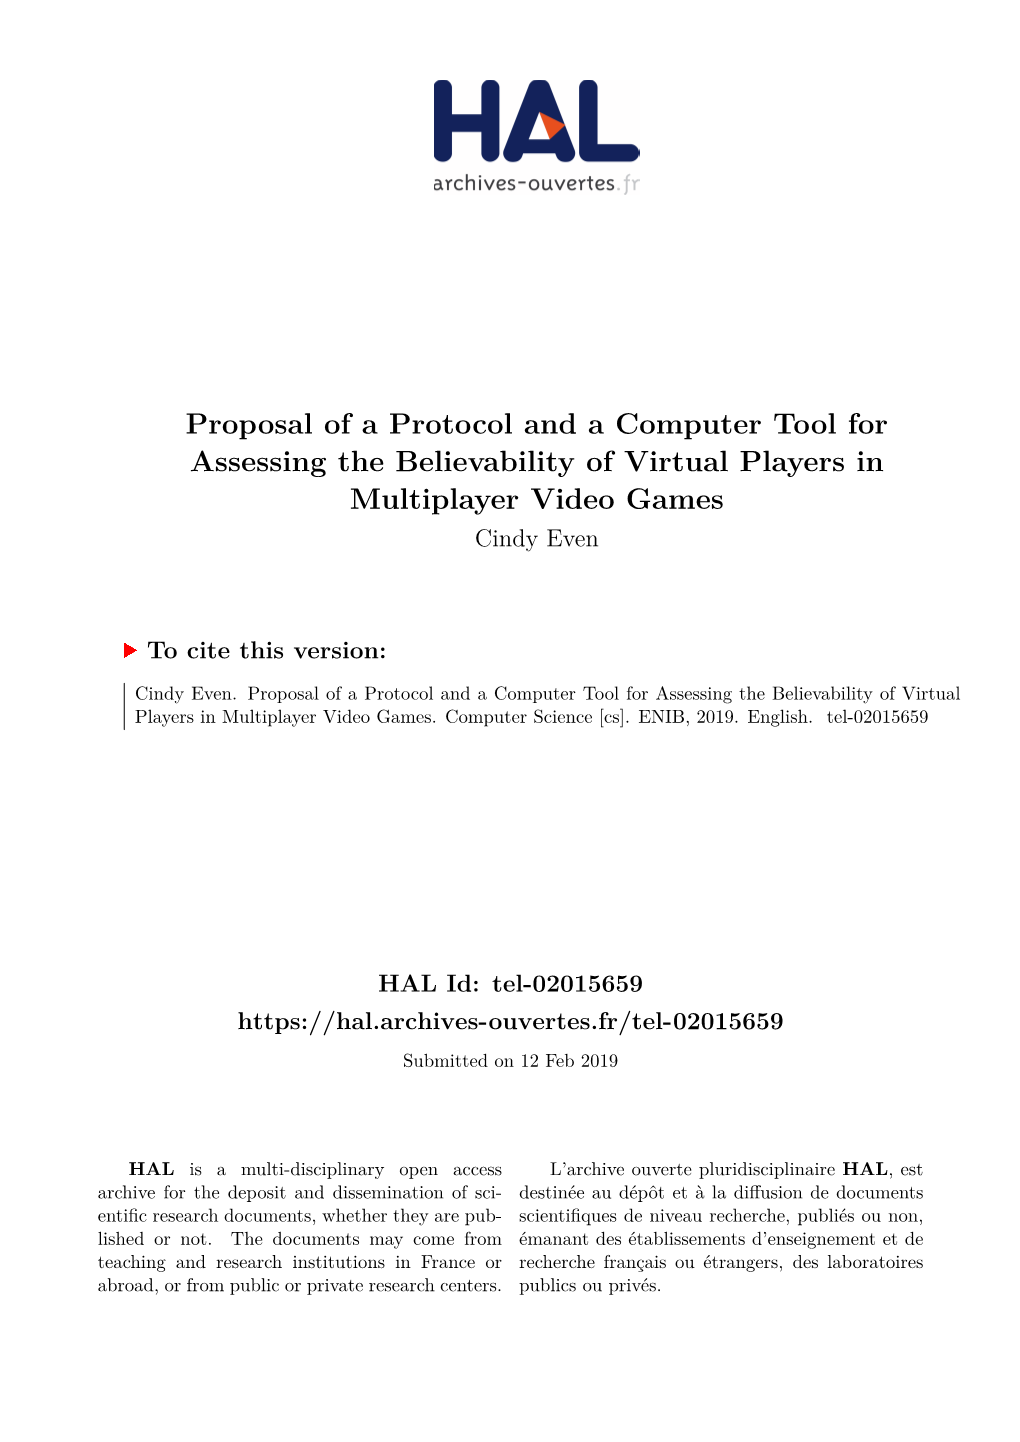 Proposal of a Protocol and a Computer Tool for Assessing the Believability of Virtual Players in Multiplayer Video Games Cindy Even